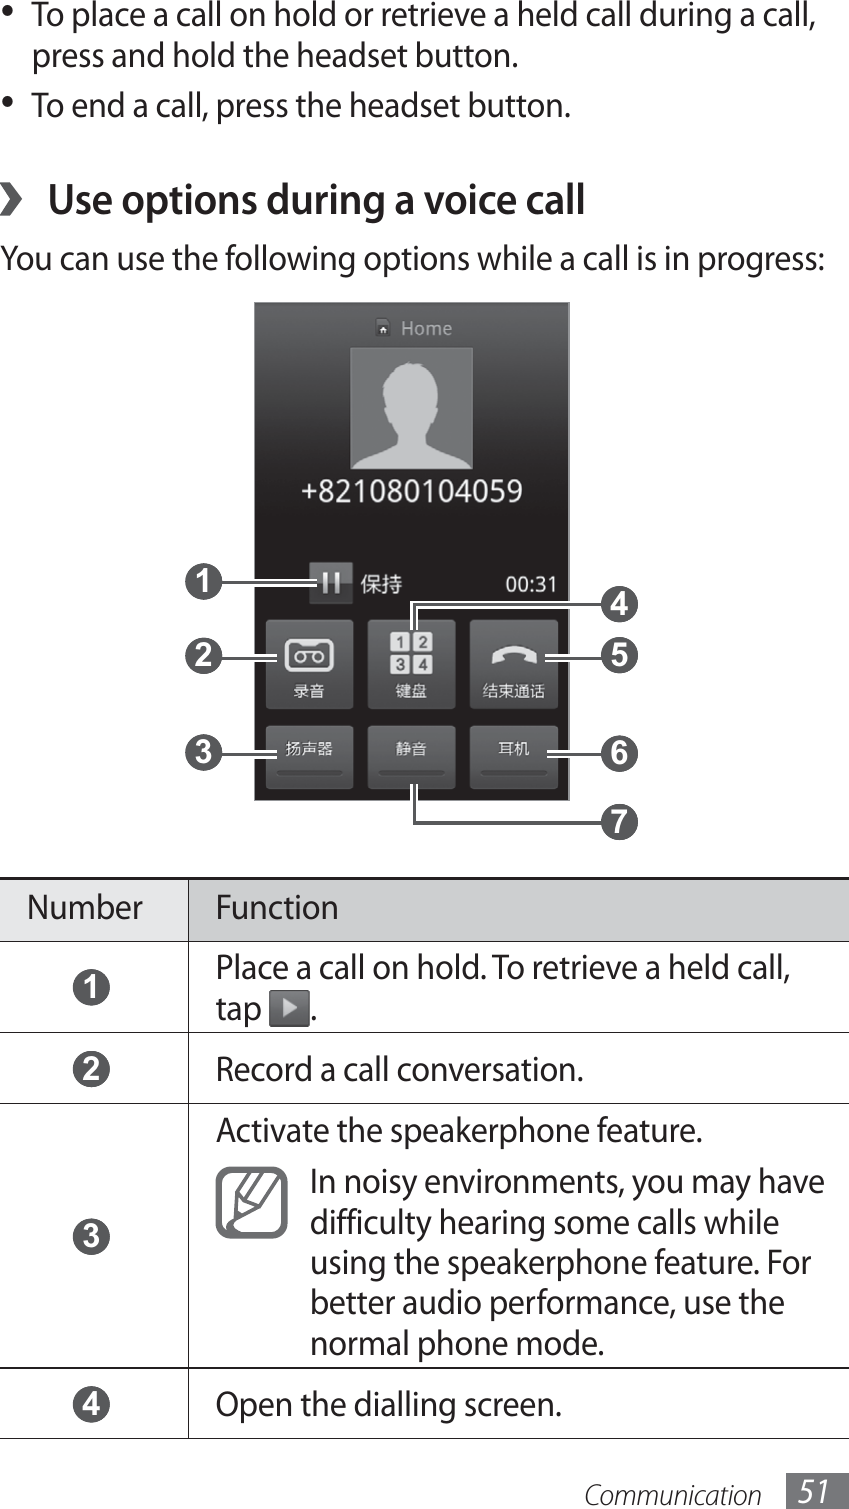 Communication 51To place a call on hold or retrieve a held call during a call, • press and hold the headset button.To end a call, press the headset button.• Use options during a voice call ›You can use the following options while a call is in progress: 5  6  1  2  3  4  7 Number Function 1 Place a call on hold. To retrieve a held call, tap  . 2 Record a call conversation. 3 Activate the speakerphone feature.In noisy environments, you may have difficulty hearing some calls while using the speakerphone feature. For better audio performance, use the normal phone mode. 4 Open the dialling screen.